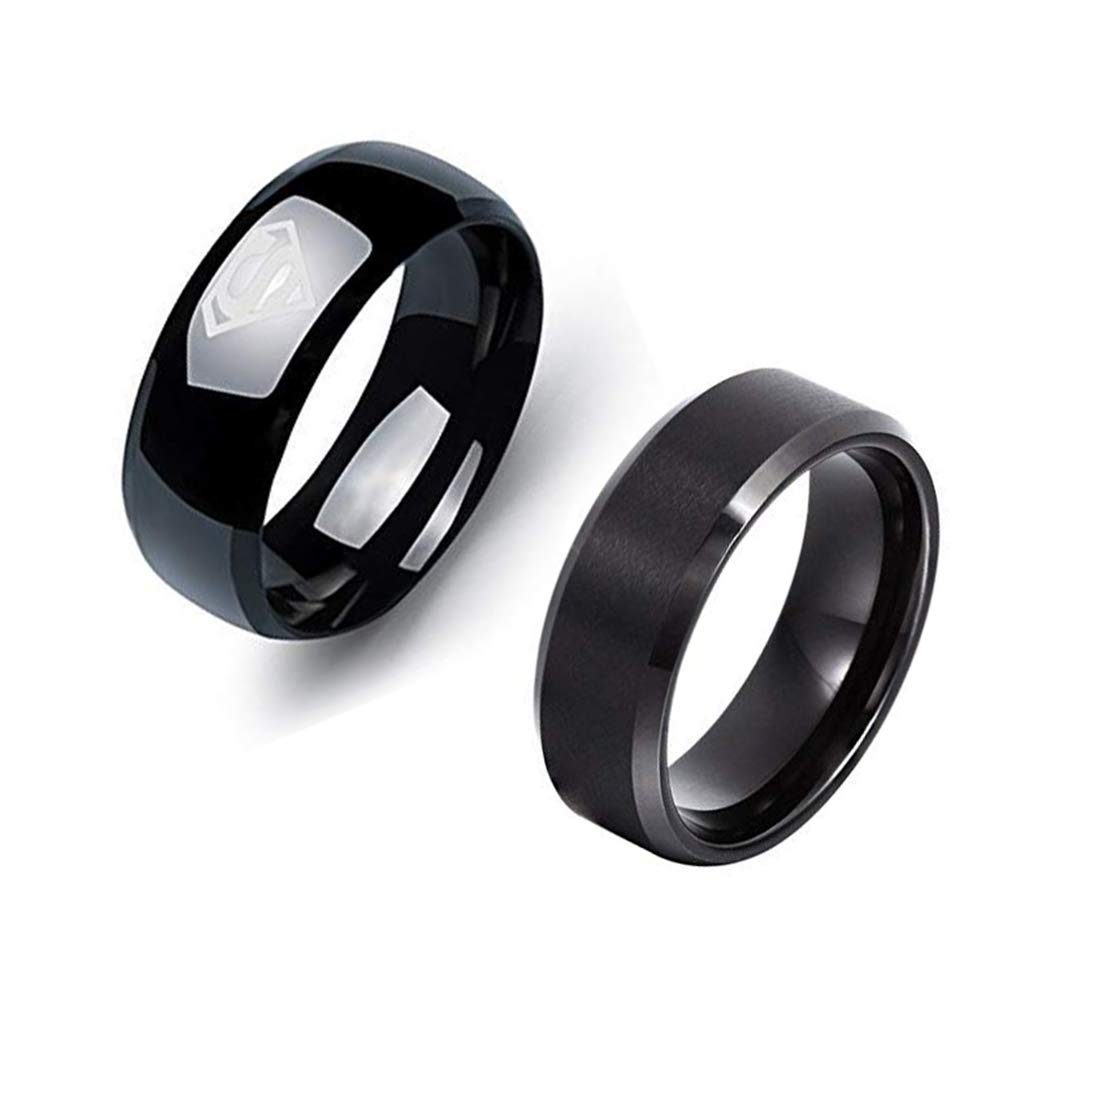 Yellow Chimes Rings for Men Combo of 2 PC Ring Stainless Steel Superman Black Band Rings Set for Men and Boys. (10)